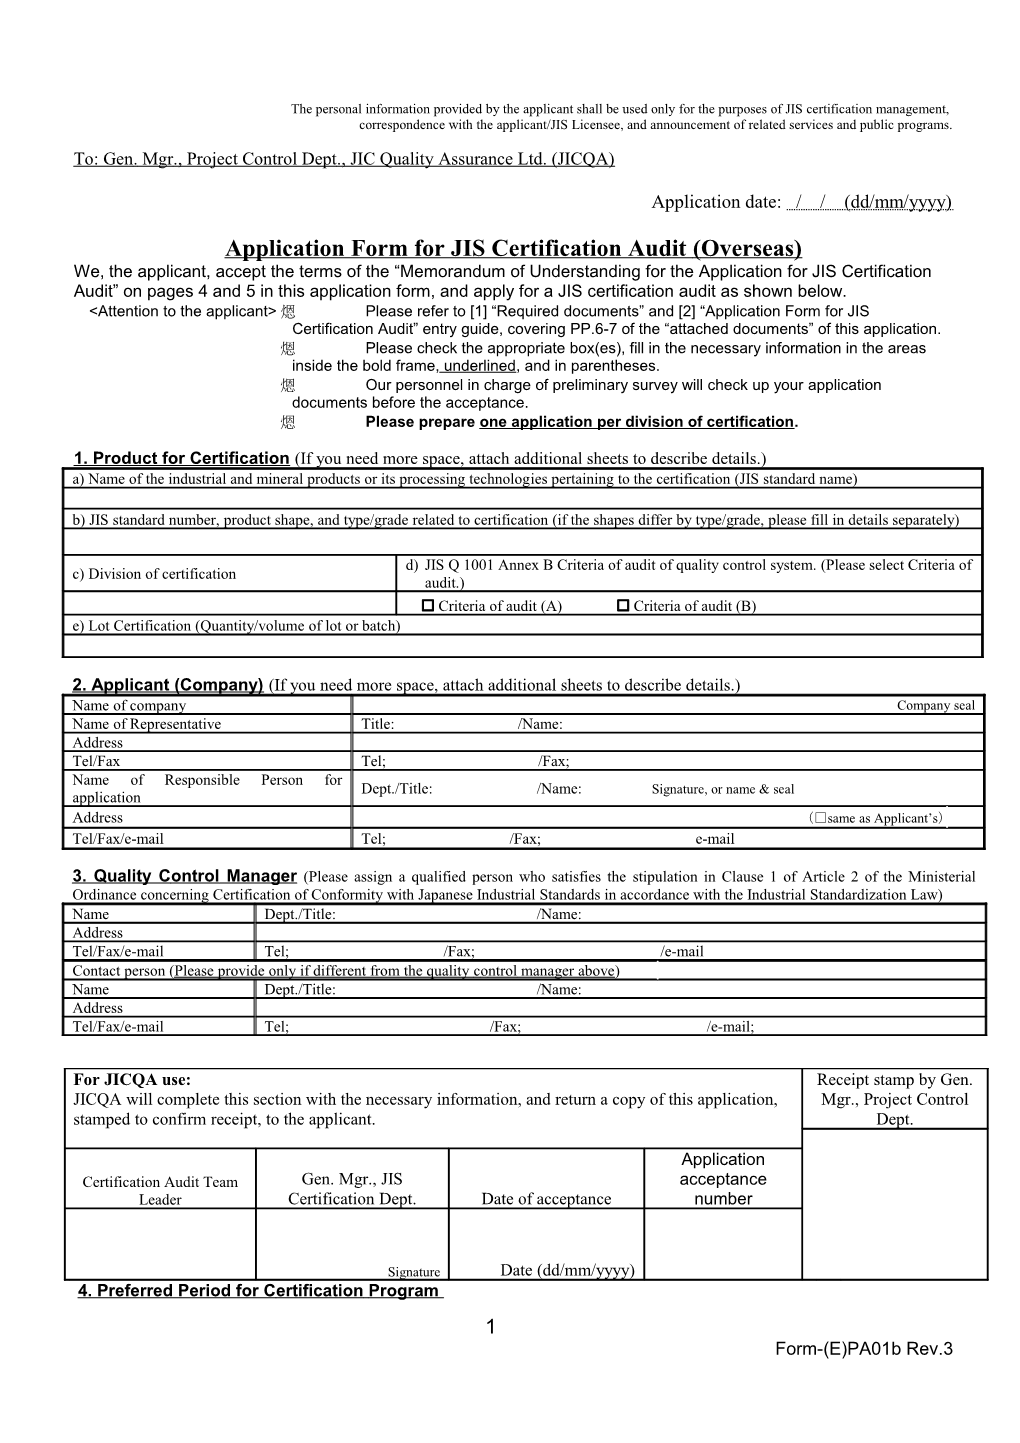 Application Form for JIS Certification Audit (Overseas)